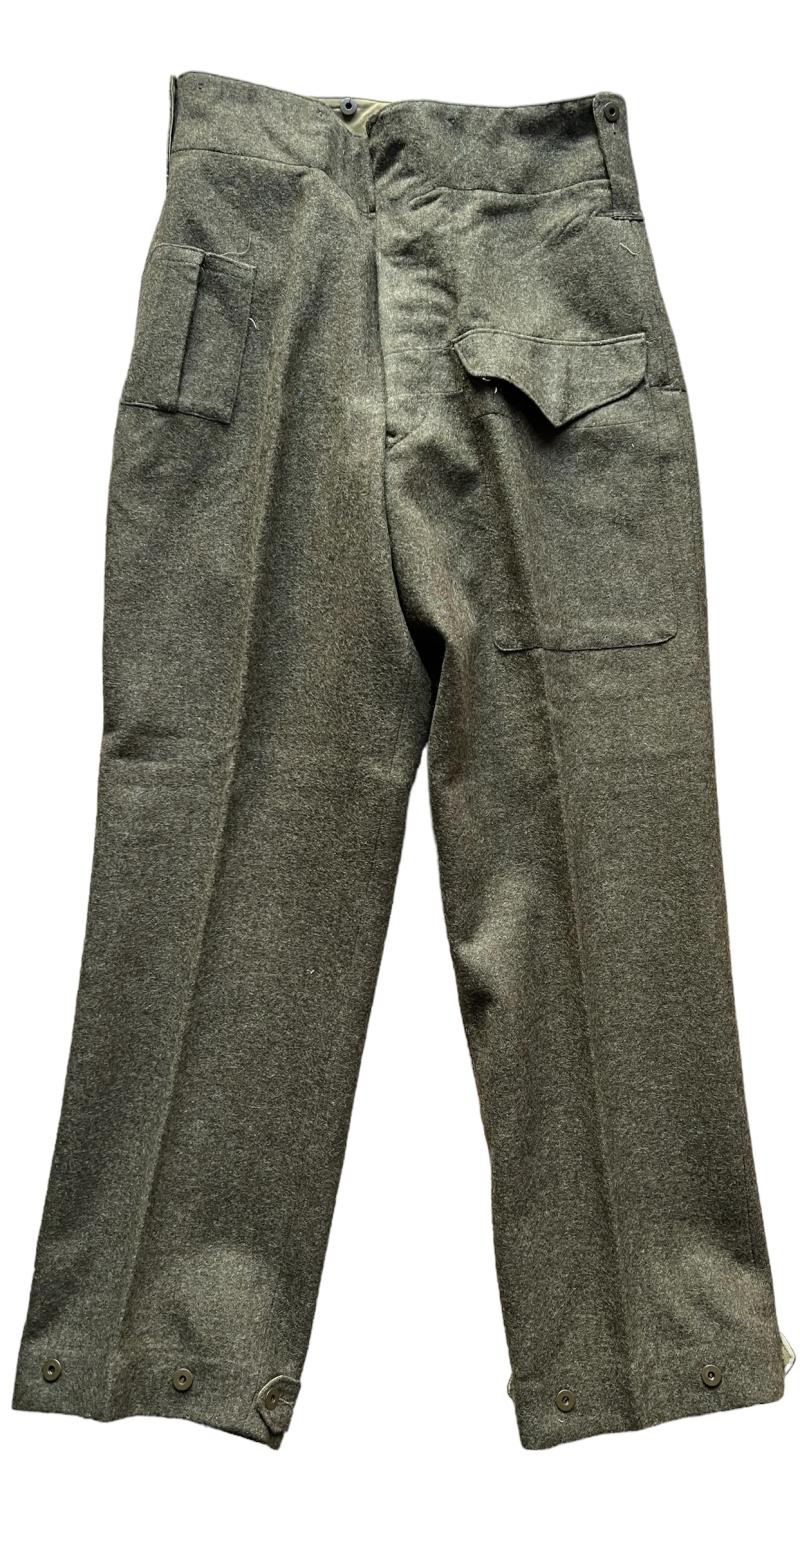 Canadian Battle Dress Trousers 1945 Dated size 15 - Unissued Condition i.e. Stone Mint